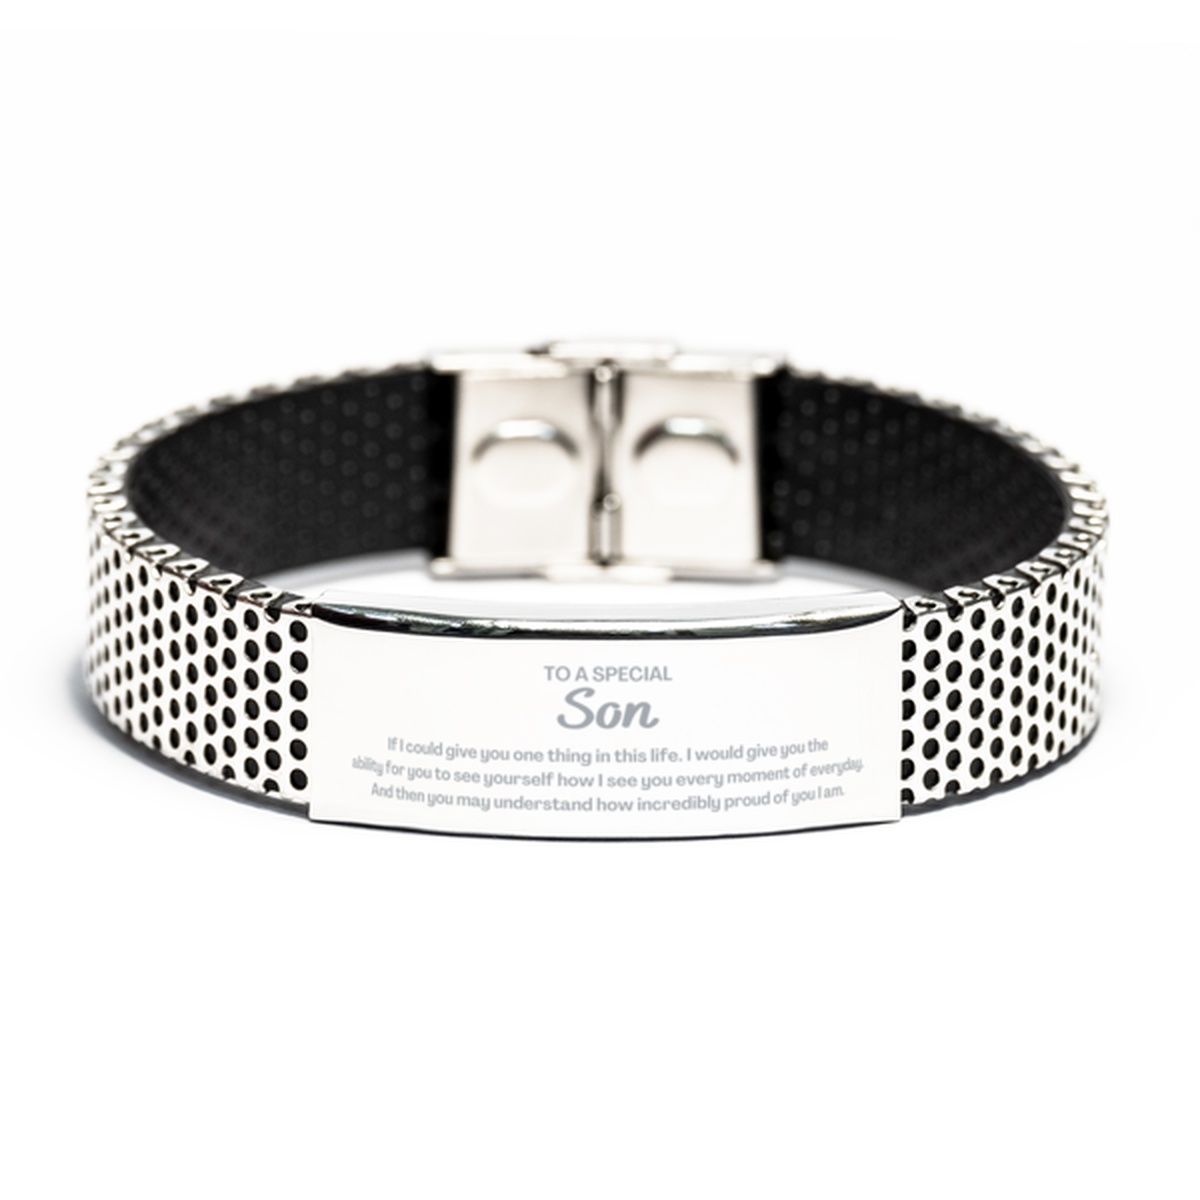 To My Son Stainless Steel Bracelet, Gifts For Son Engraved, Inspirational Gifts for Christmas Birthday, Epic Gifts for Son To A Special Son how incredibly proud of you I am